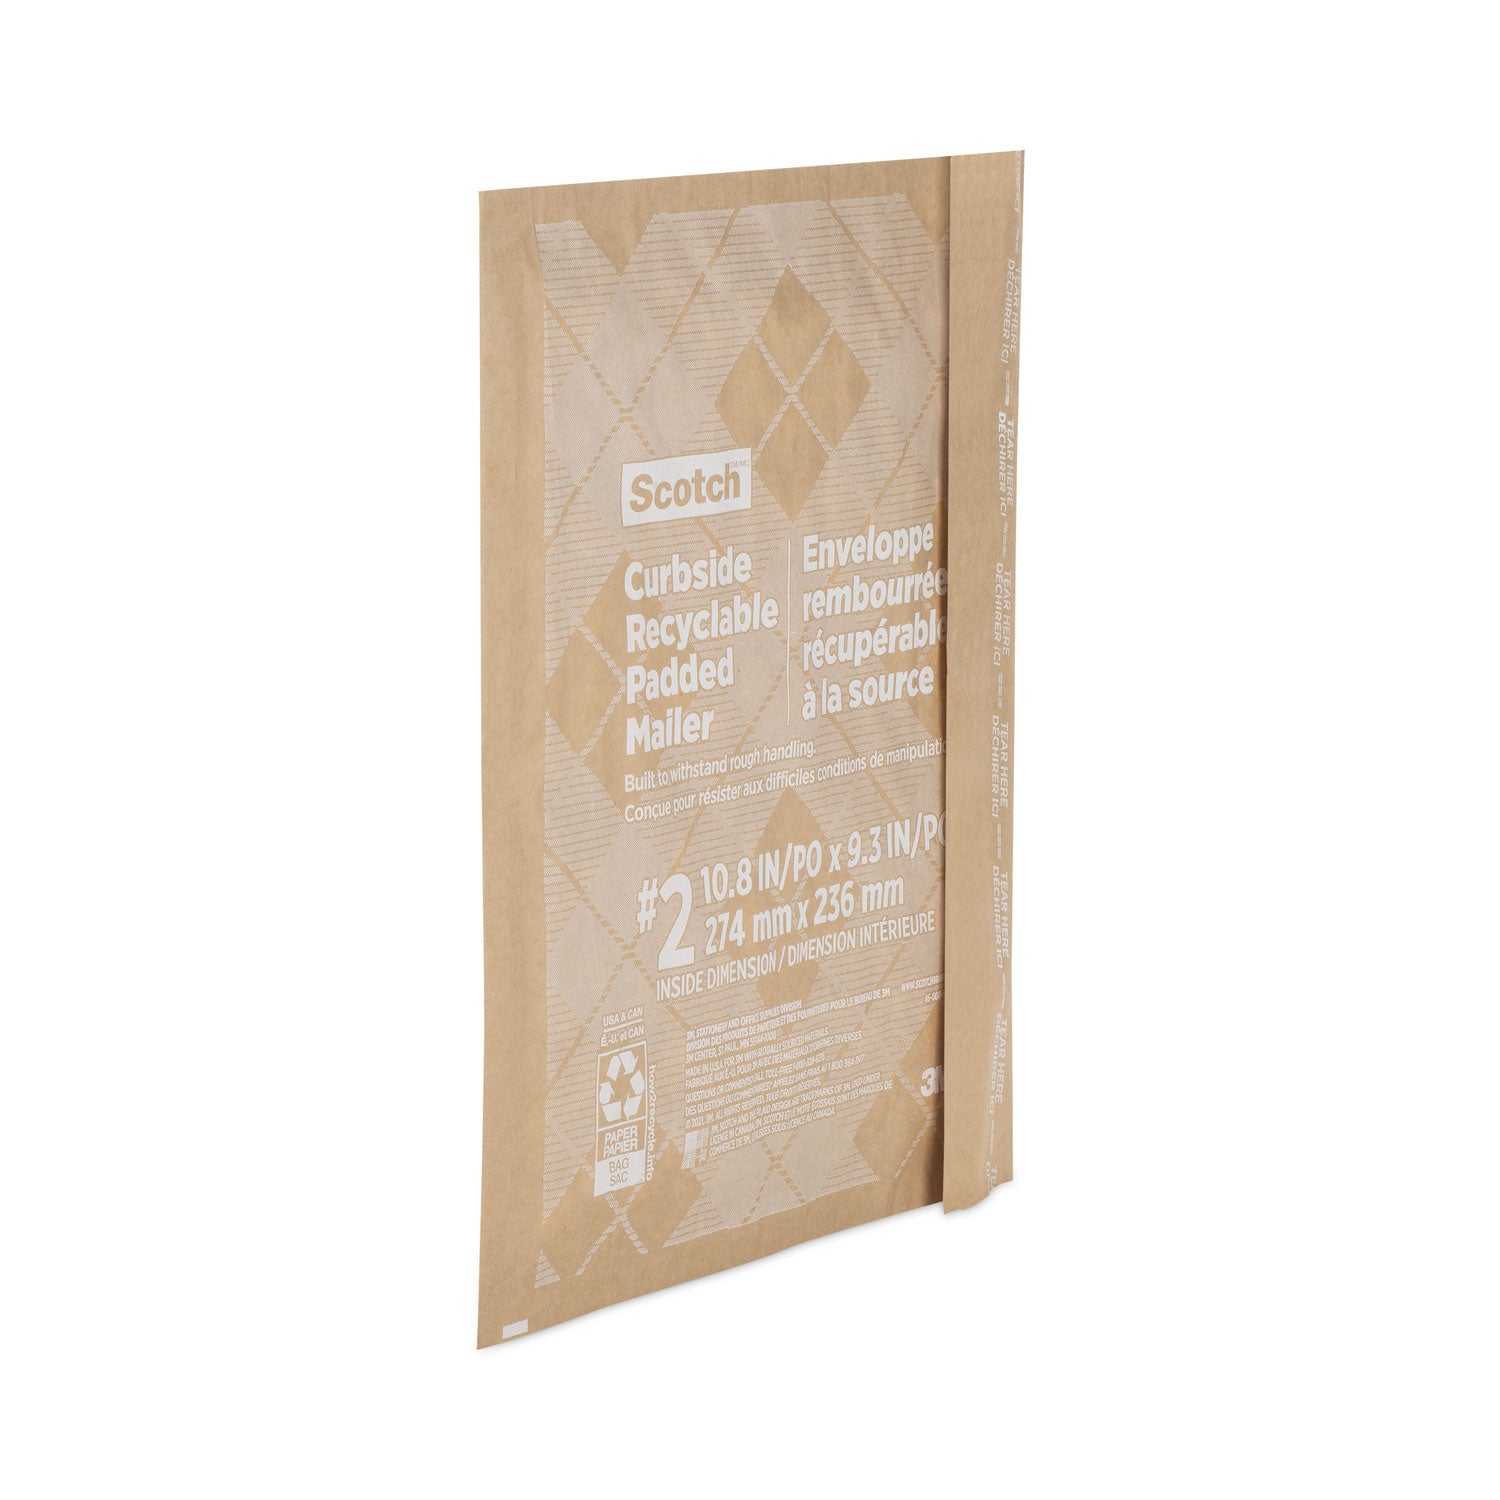 curbside-recyclable-padded-mailer-#2-bubble-cushion-self-adhesive-closure-1125-x-12-natural-kraft-100-carton_mmmcr21 - 4